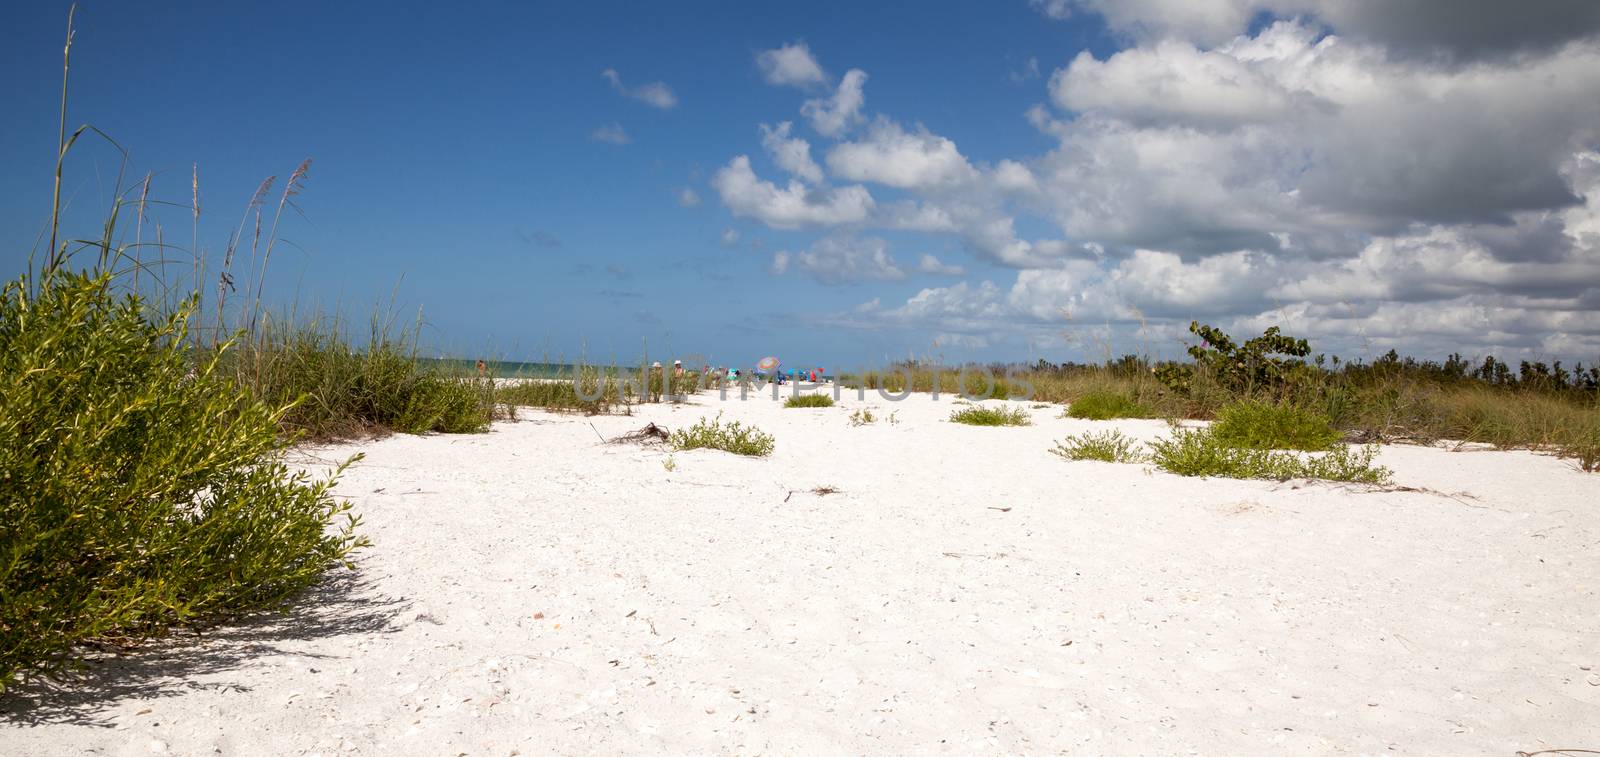 Blue sky over white sand and green beach grass of Tigertail Beach on Marco Island, Florida